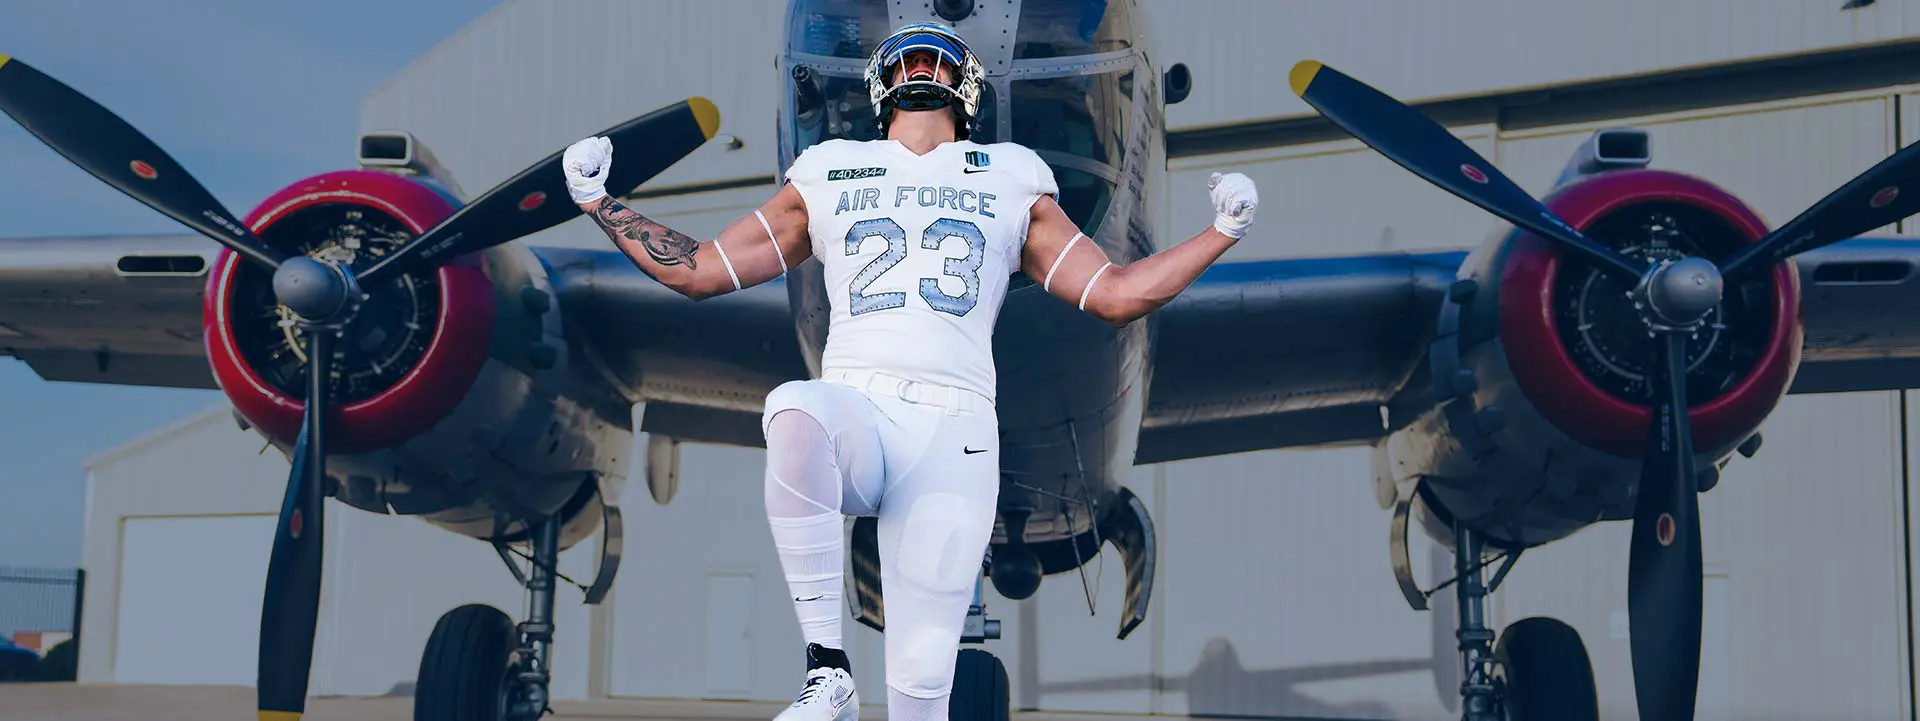 Football player in front of helicopter